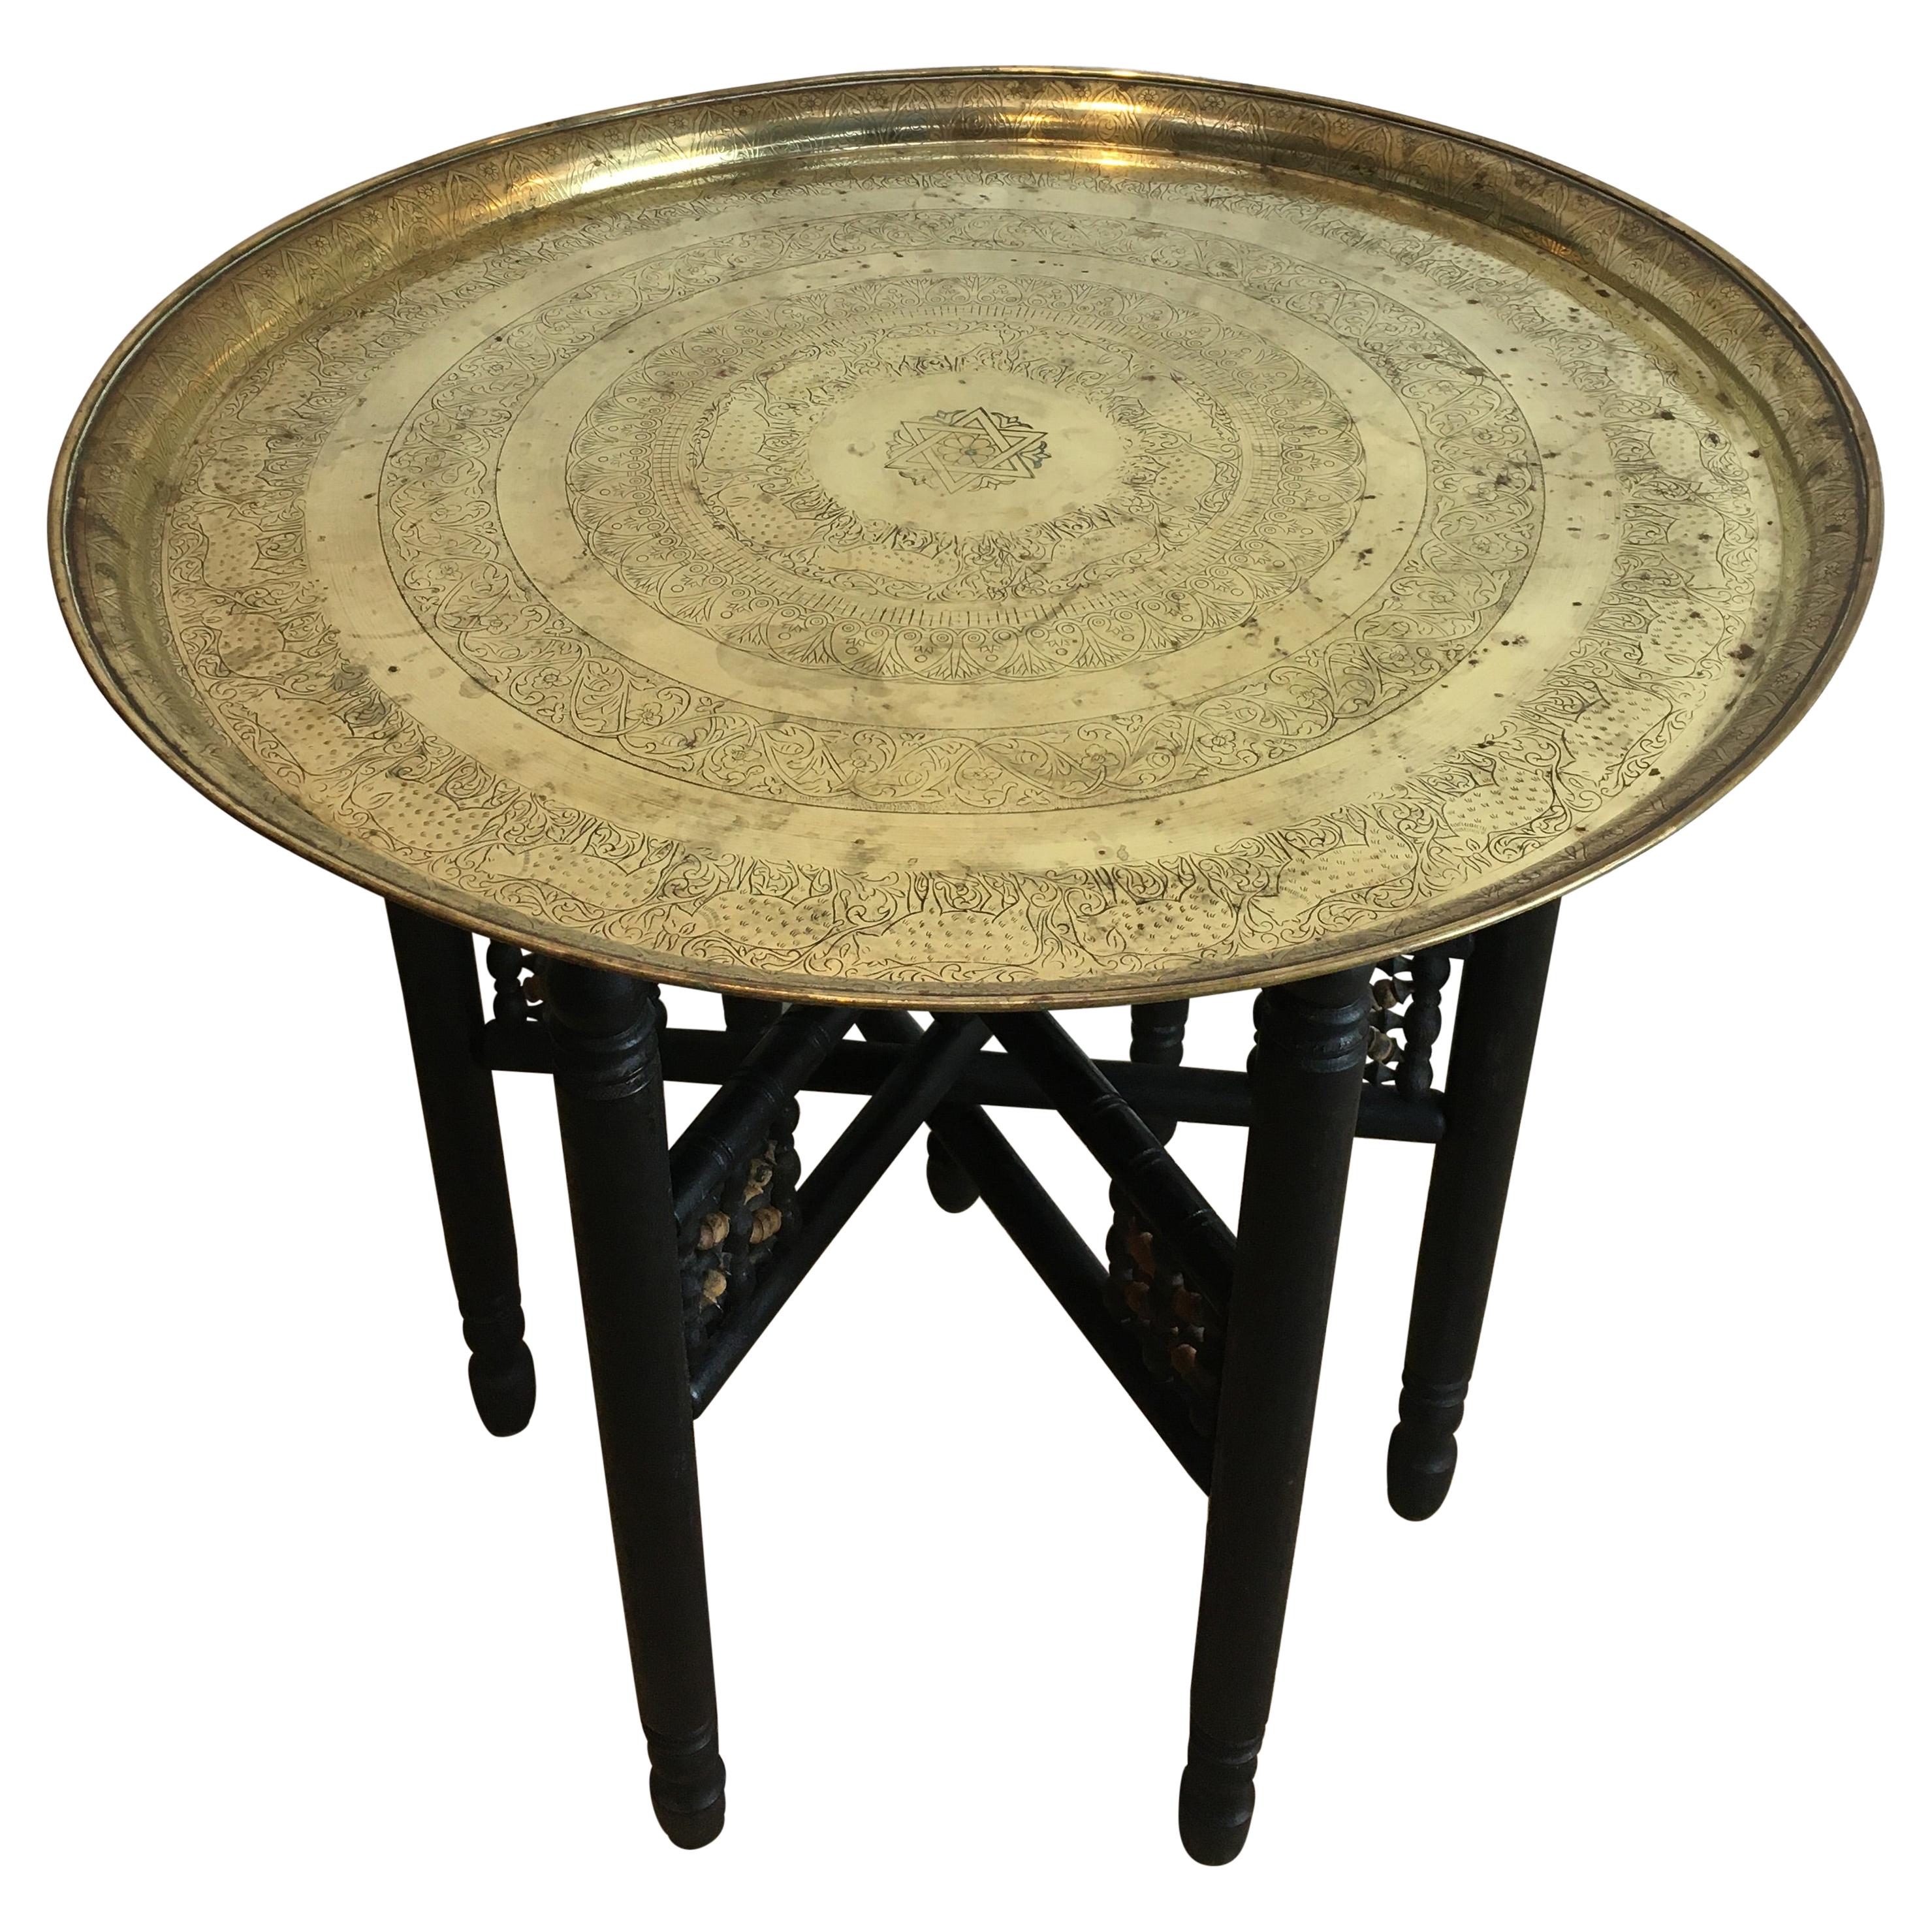 Moroccan Folding Brass Tray Table Early 20th Century